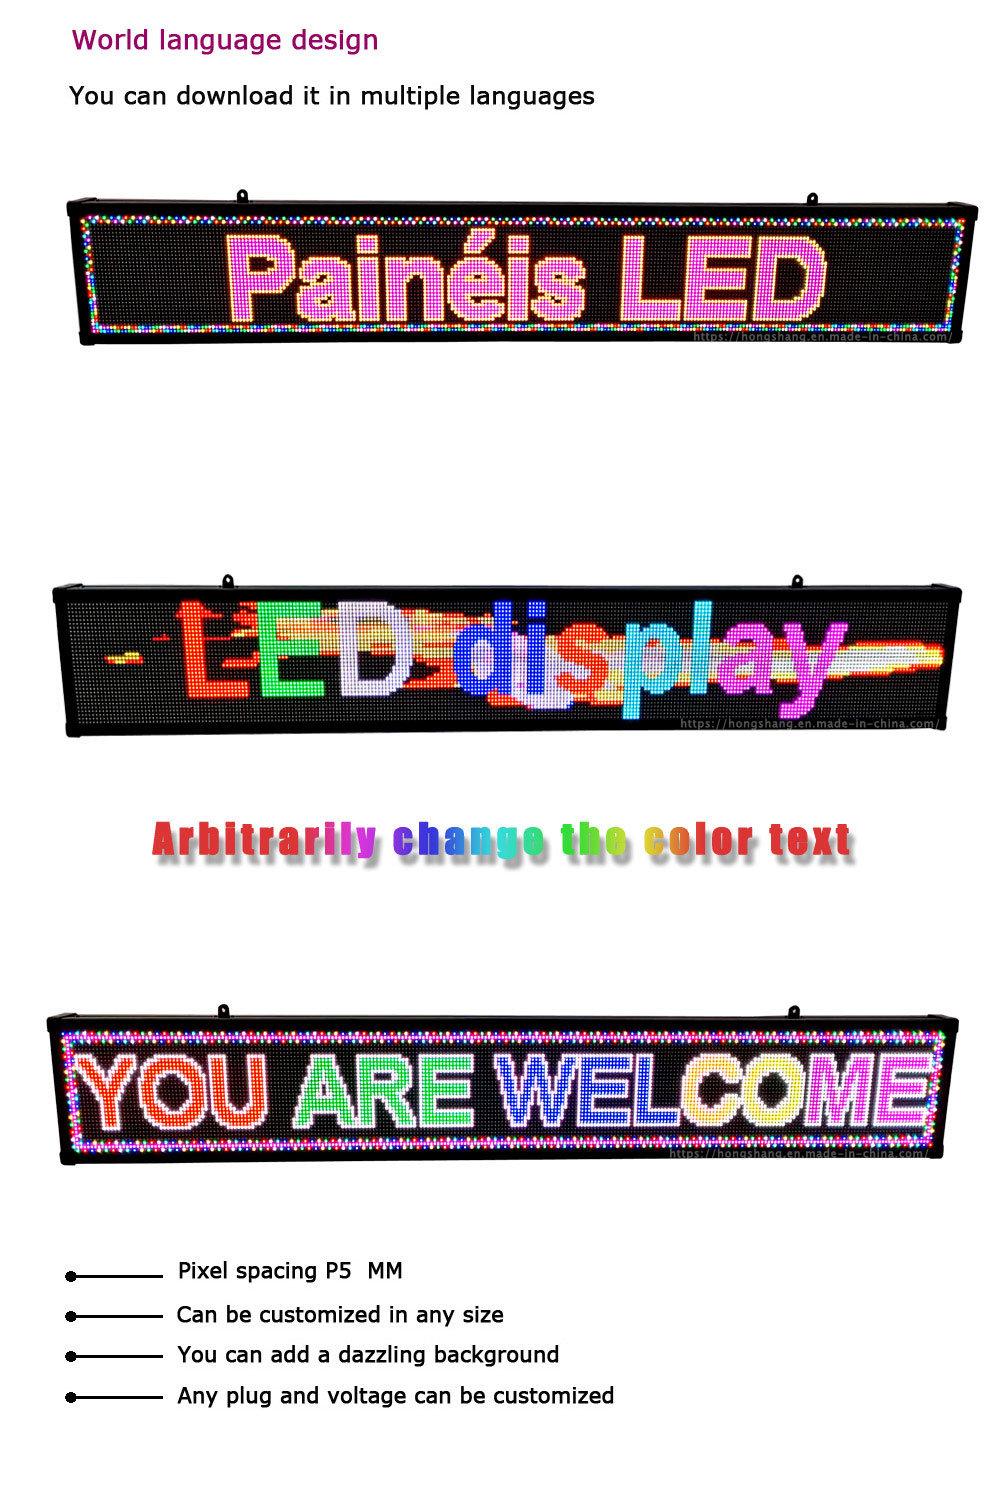 New Indoor Full Color Window Advertising Text LED Displays